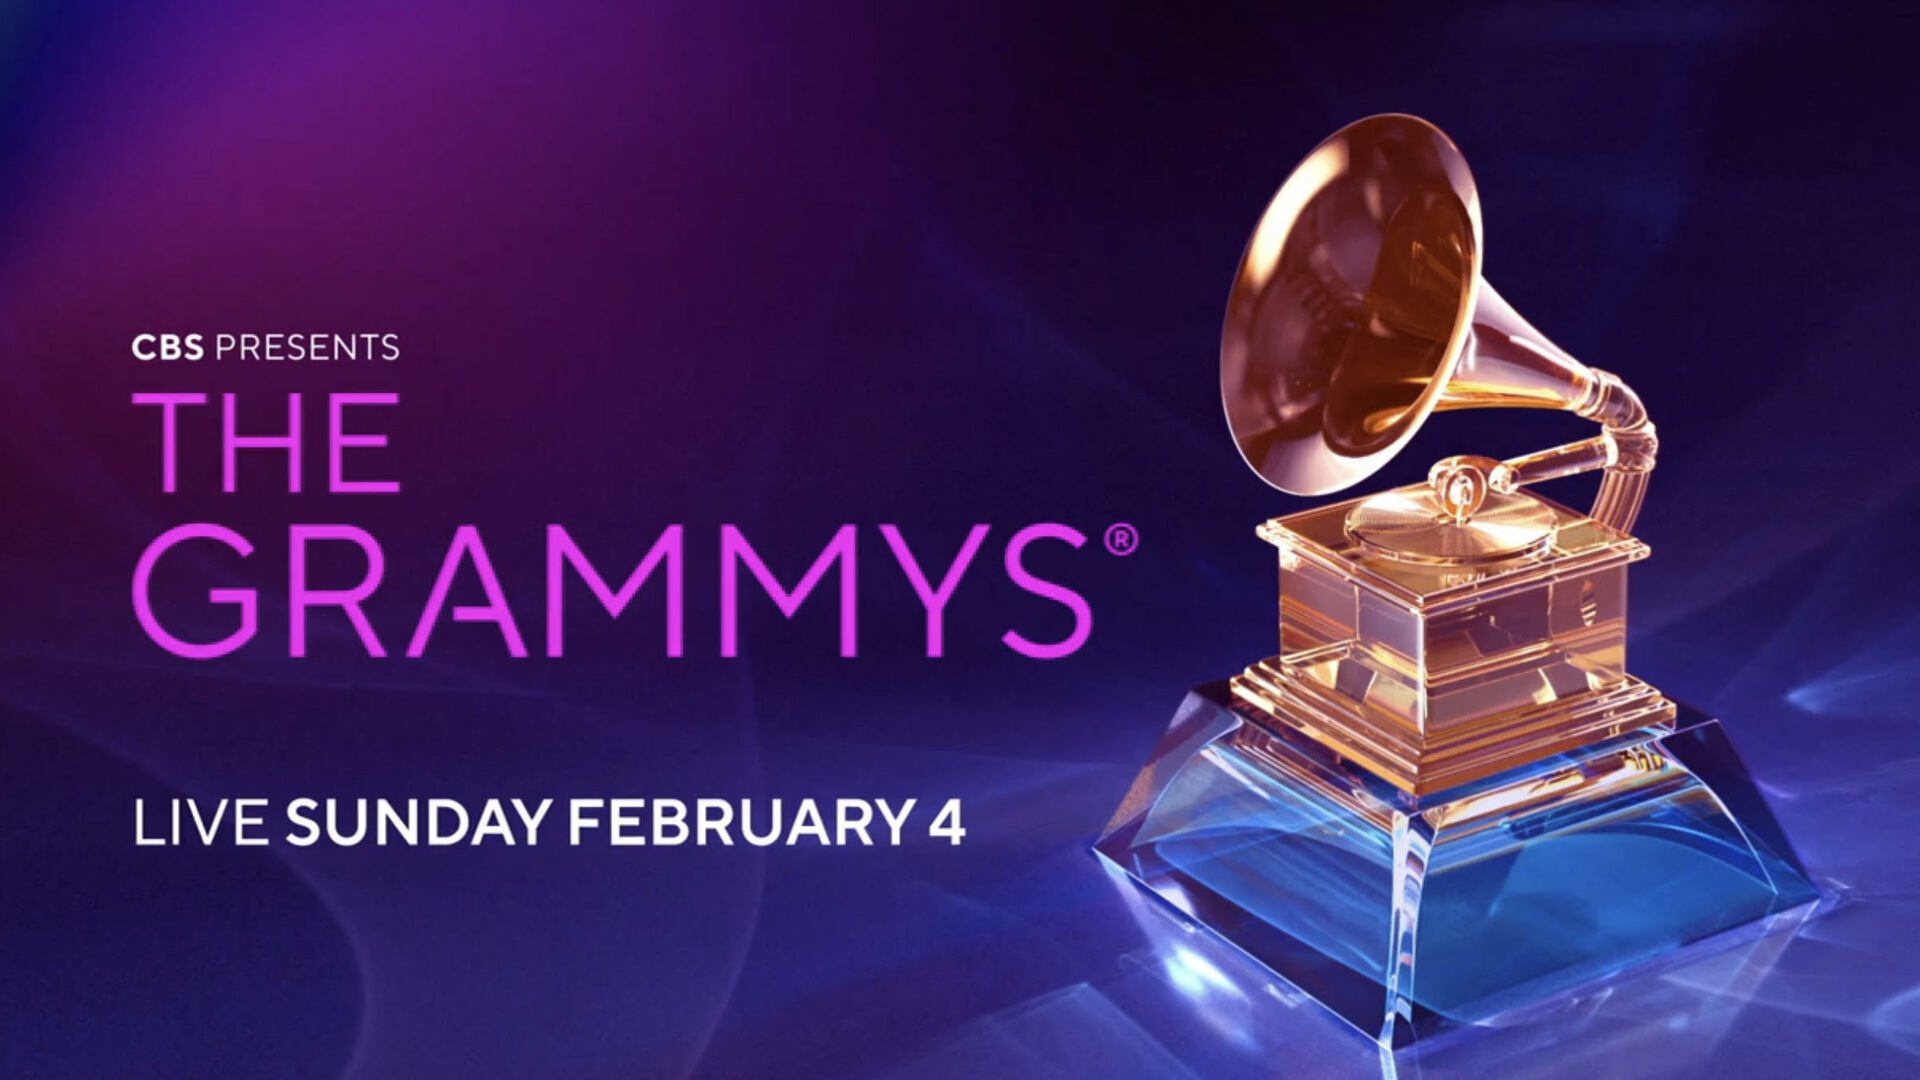 Watch GRAMMY Awards Who Will Own The Night? Full show on CBS